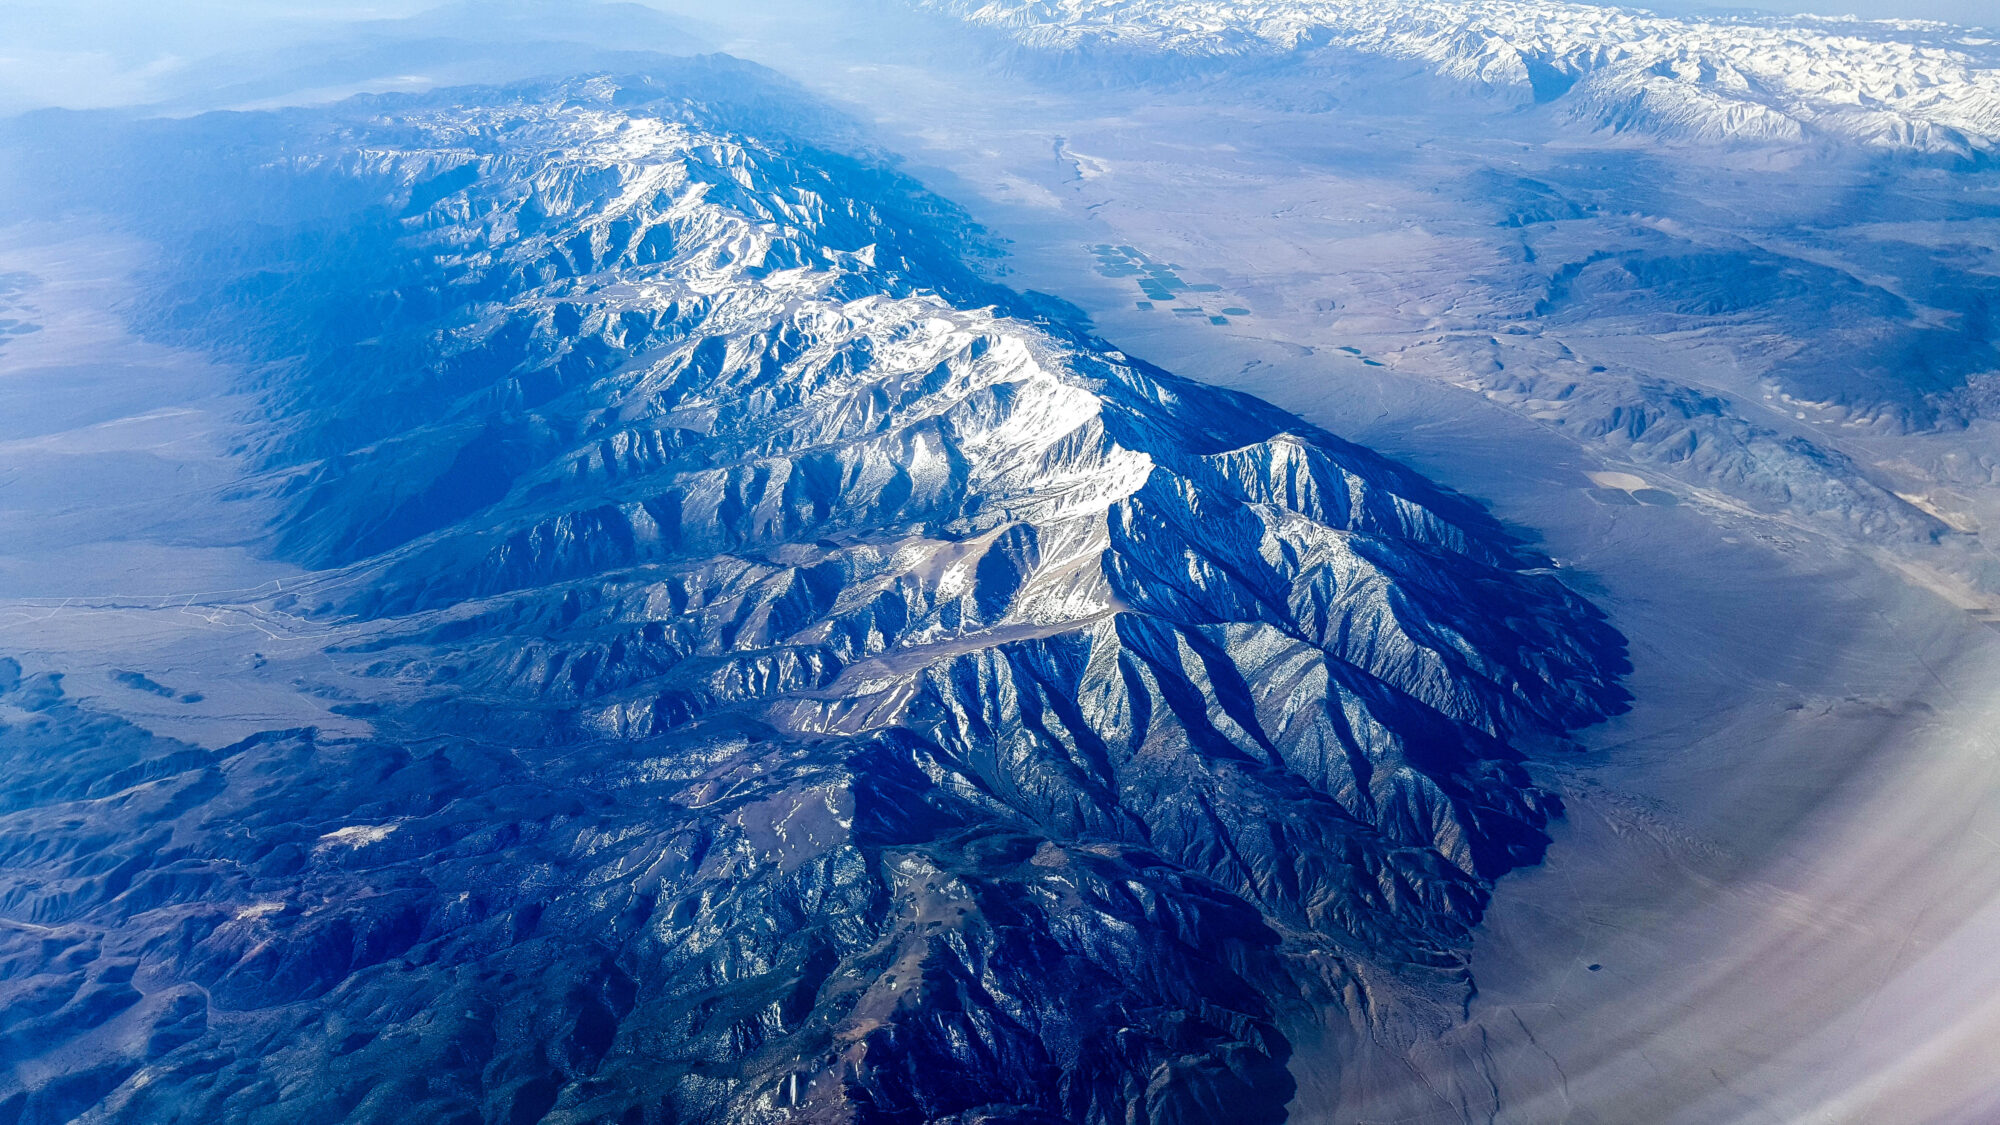 Large, impressive snow capped mountain ridge rising from valley on each side near Montgomery Pass, Nevada (looking south from airplane window)